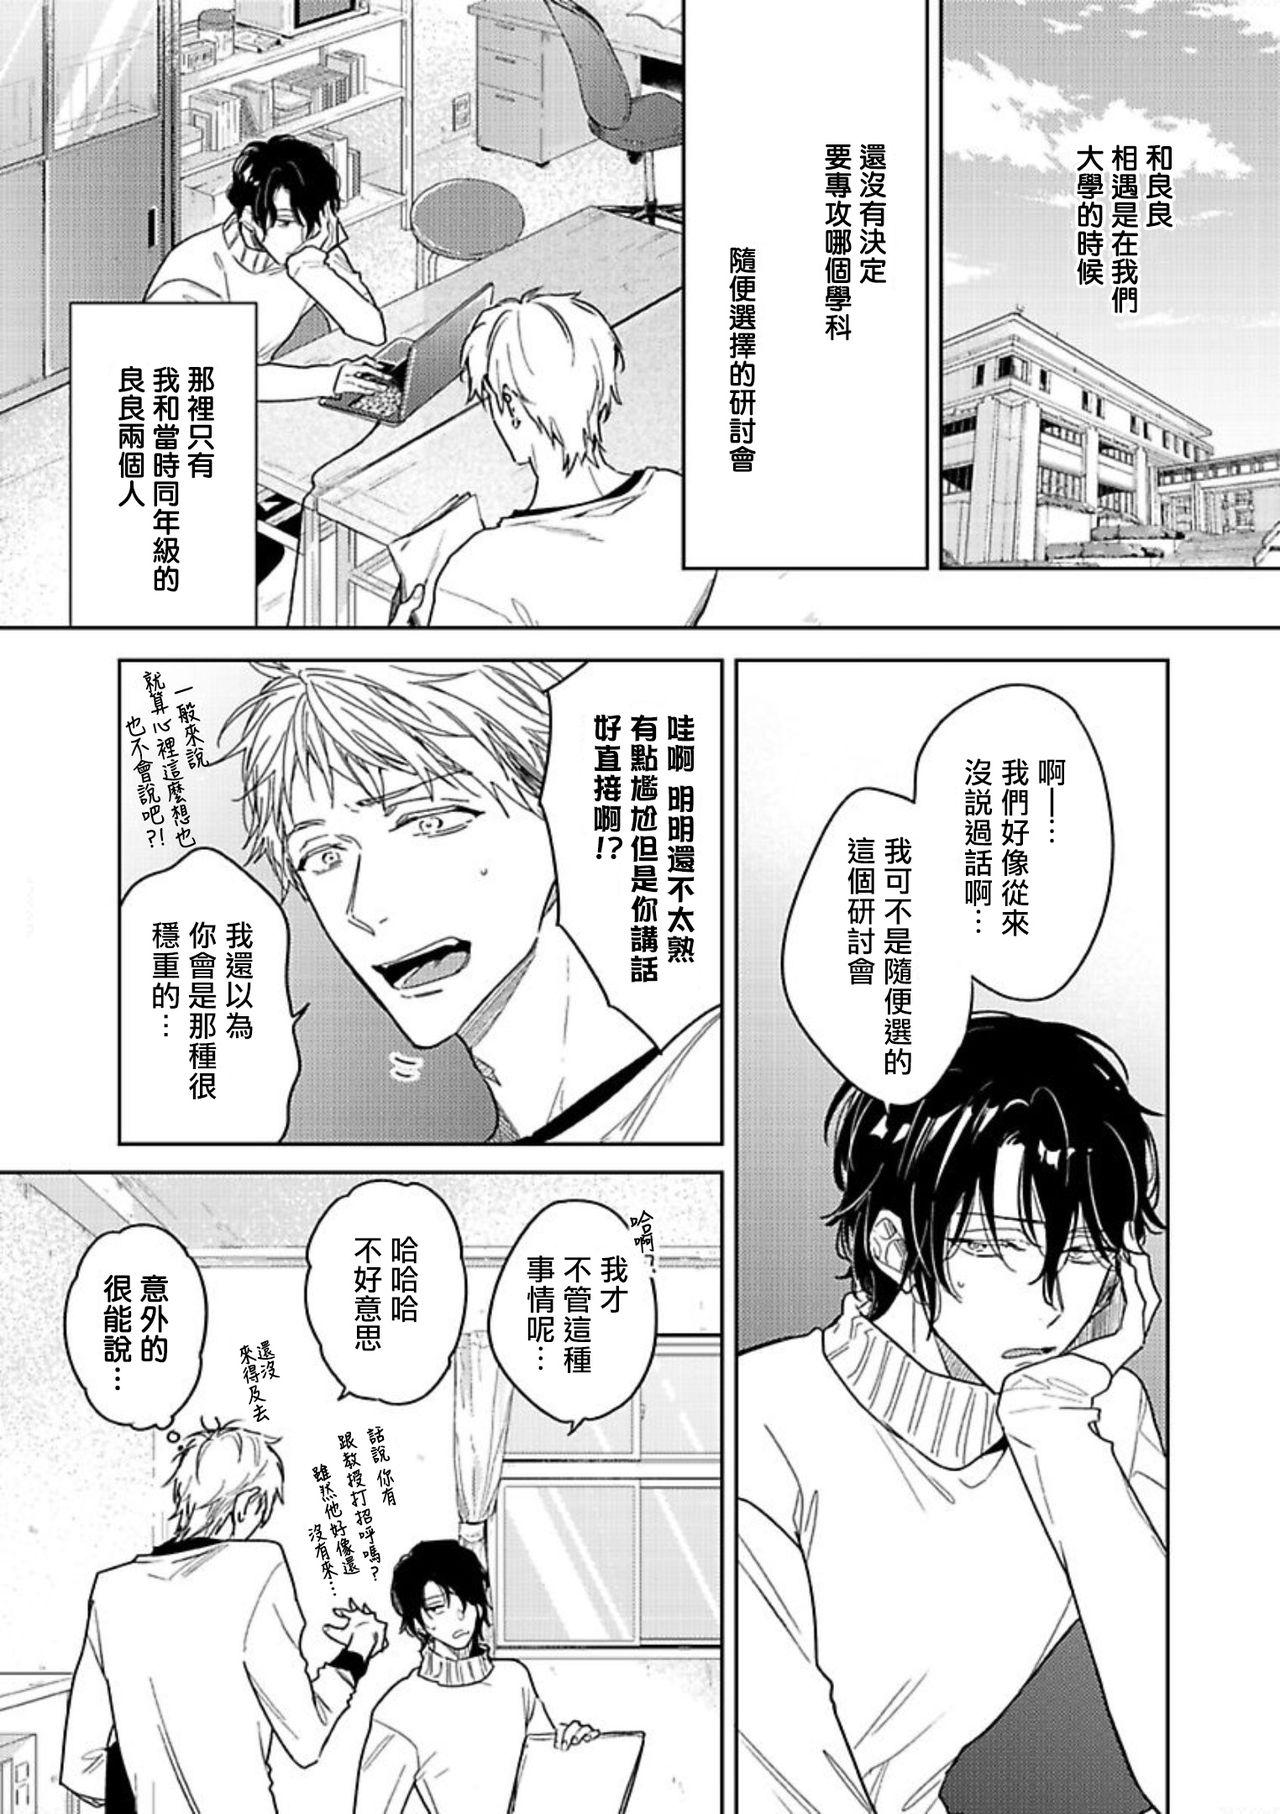 Tasogare Cure Important | 黄昏CURE IMPORTENT Ch. 1-3 63